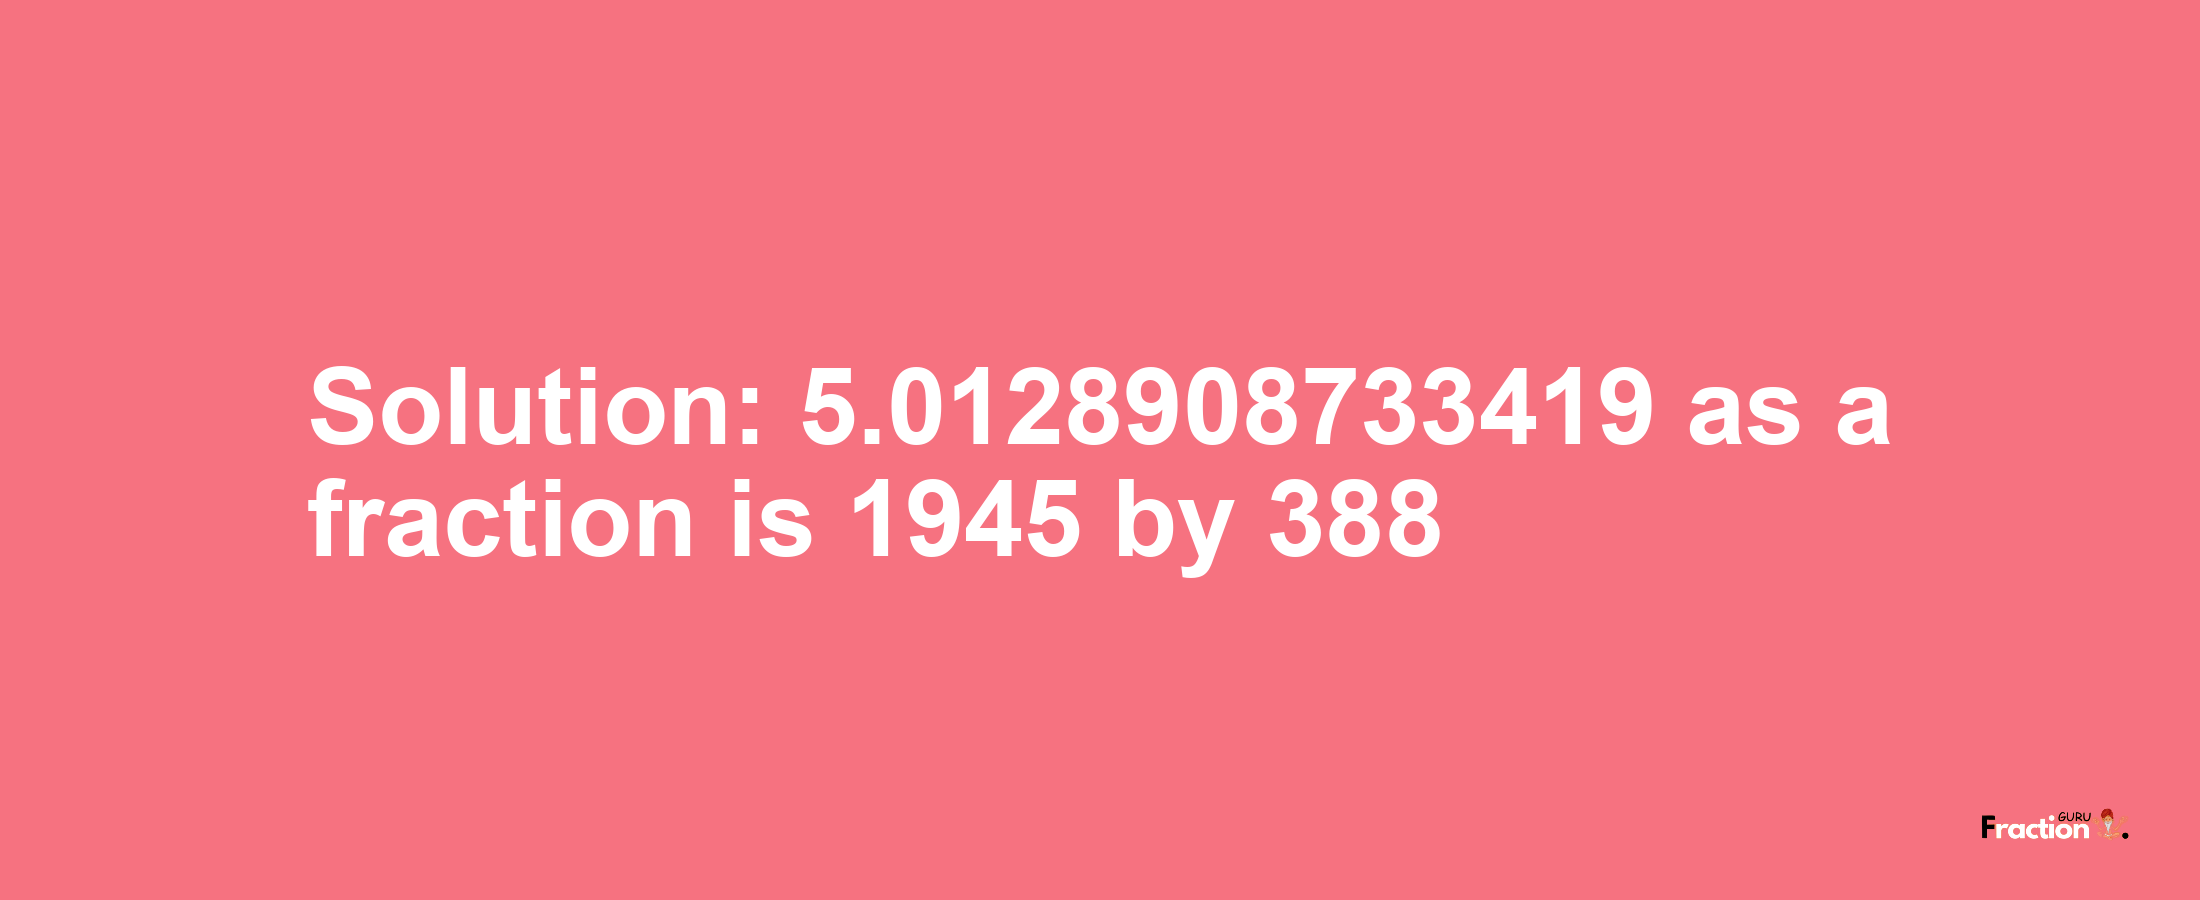 Solution:5.0128908733419 as a fraction is 1945/388